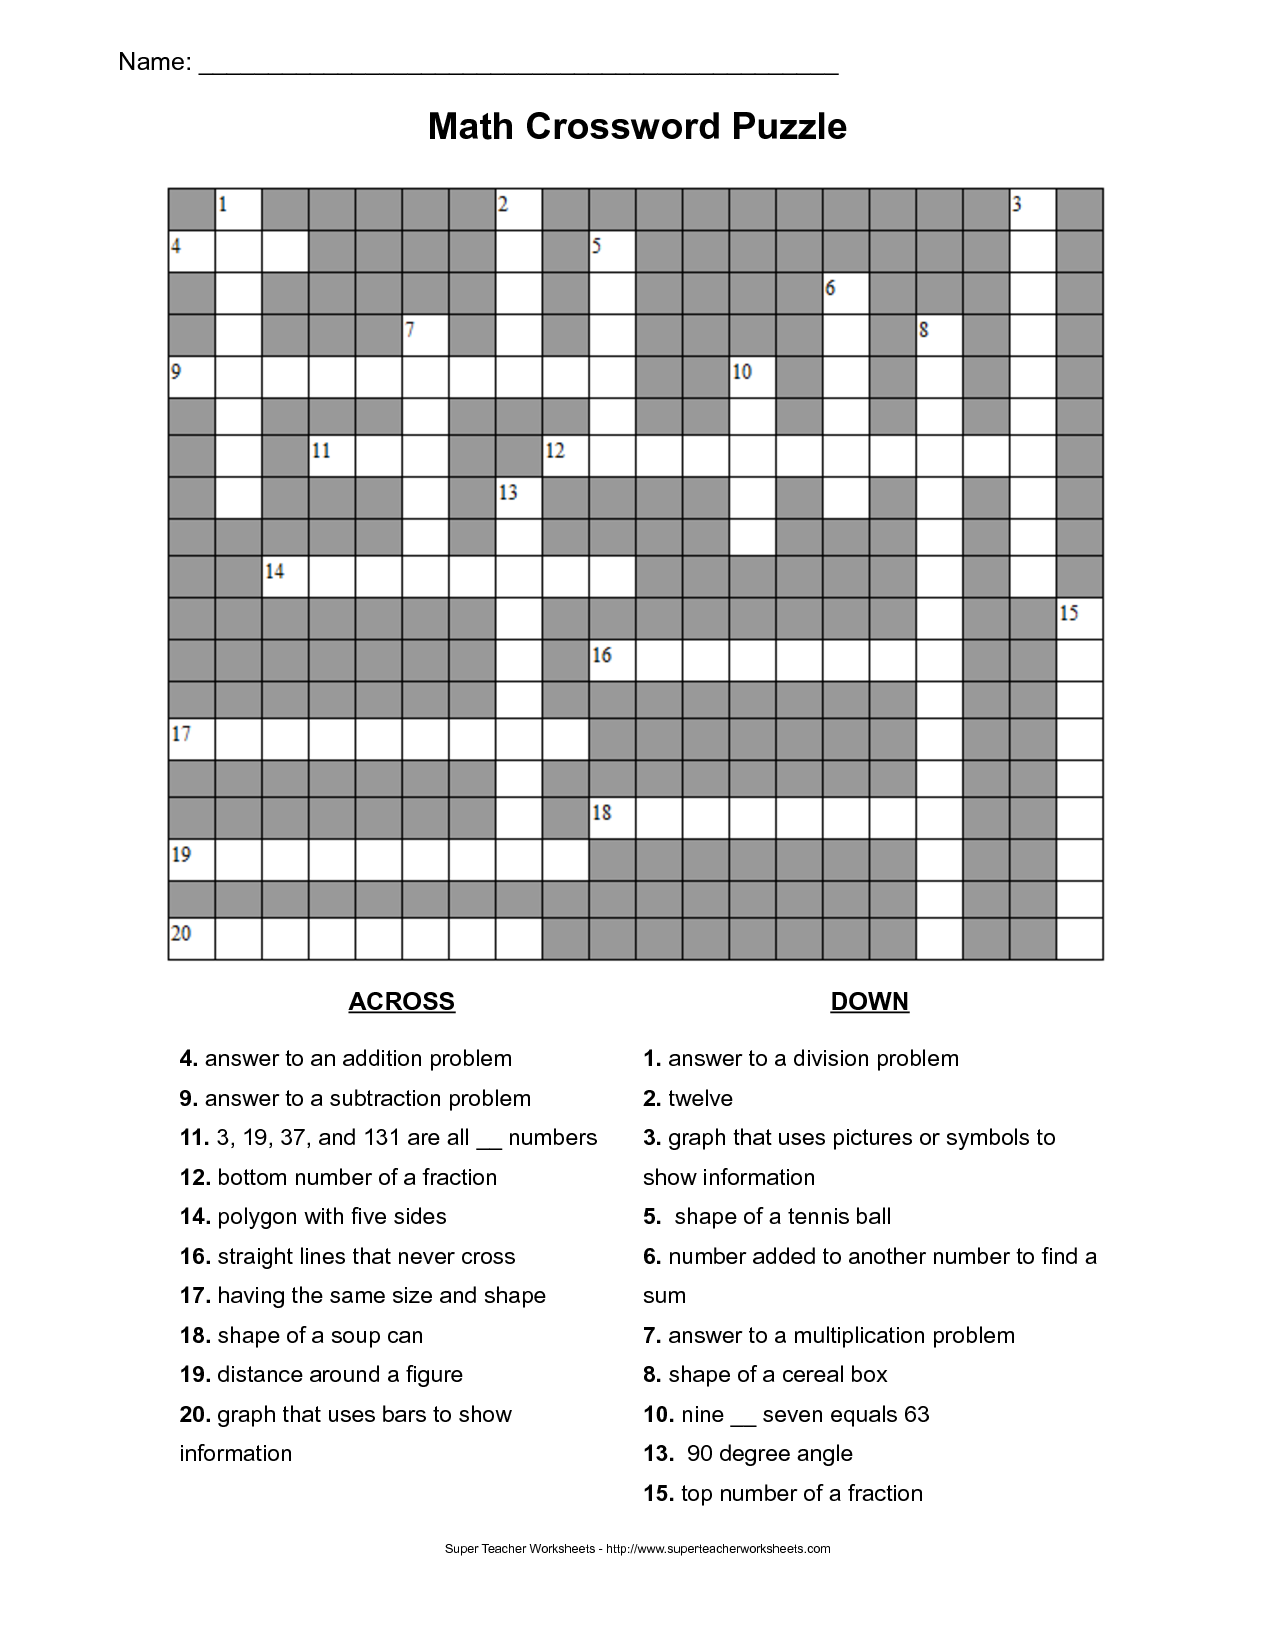 Math Crossword Puzzles with Answers Image